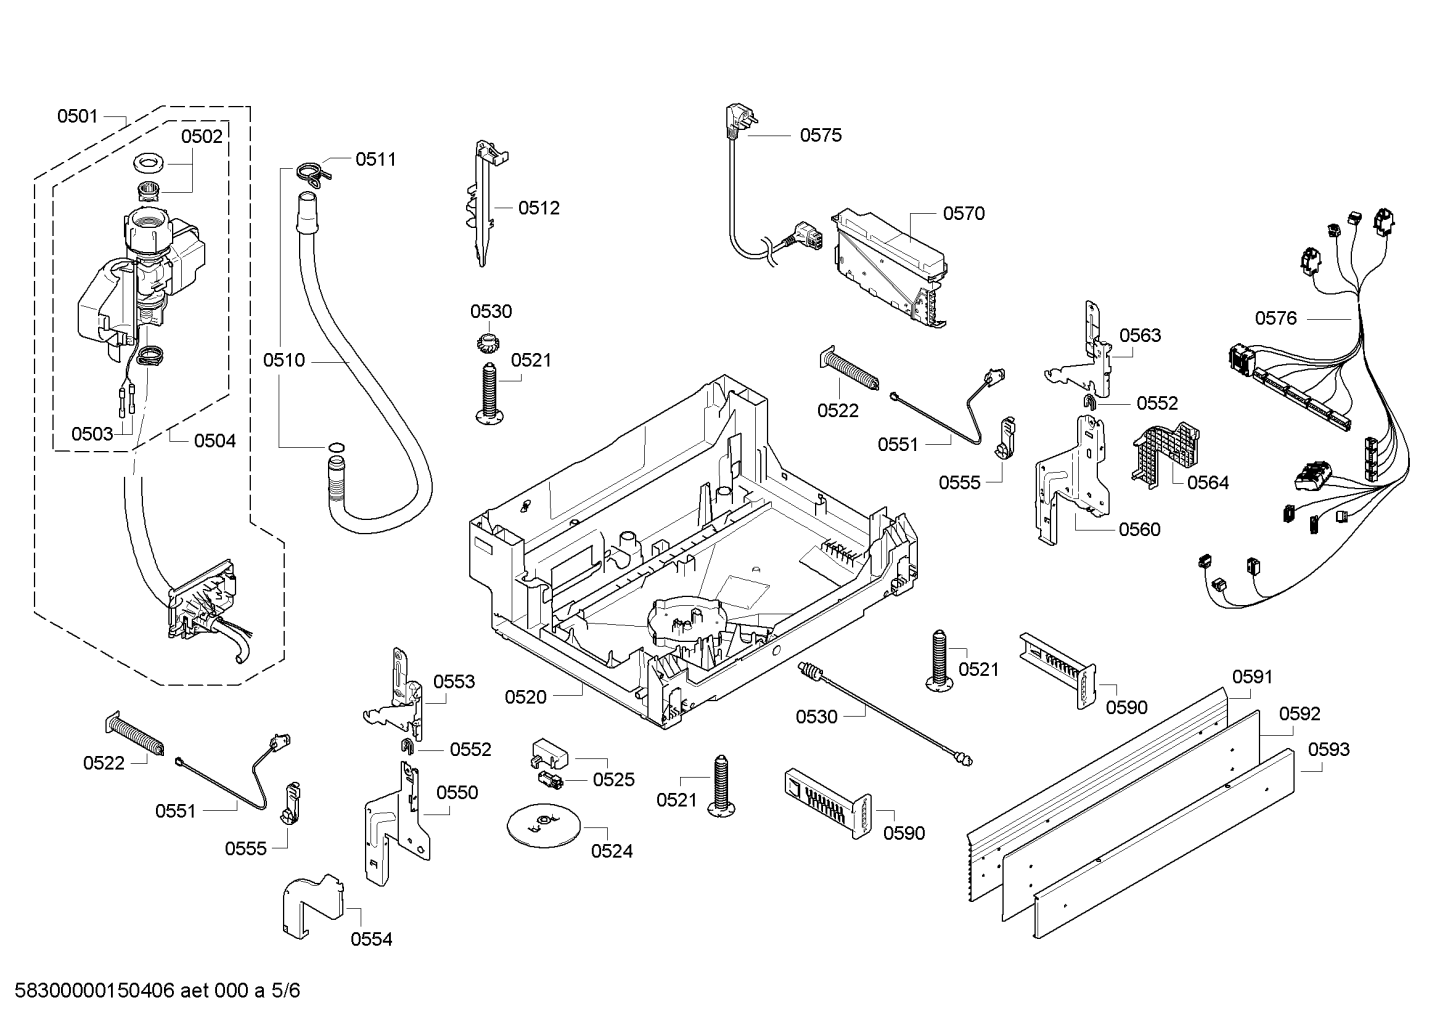 drawing_link_5_device_1587117